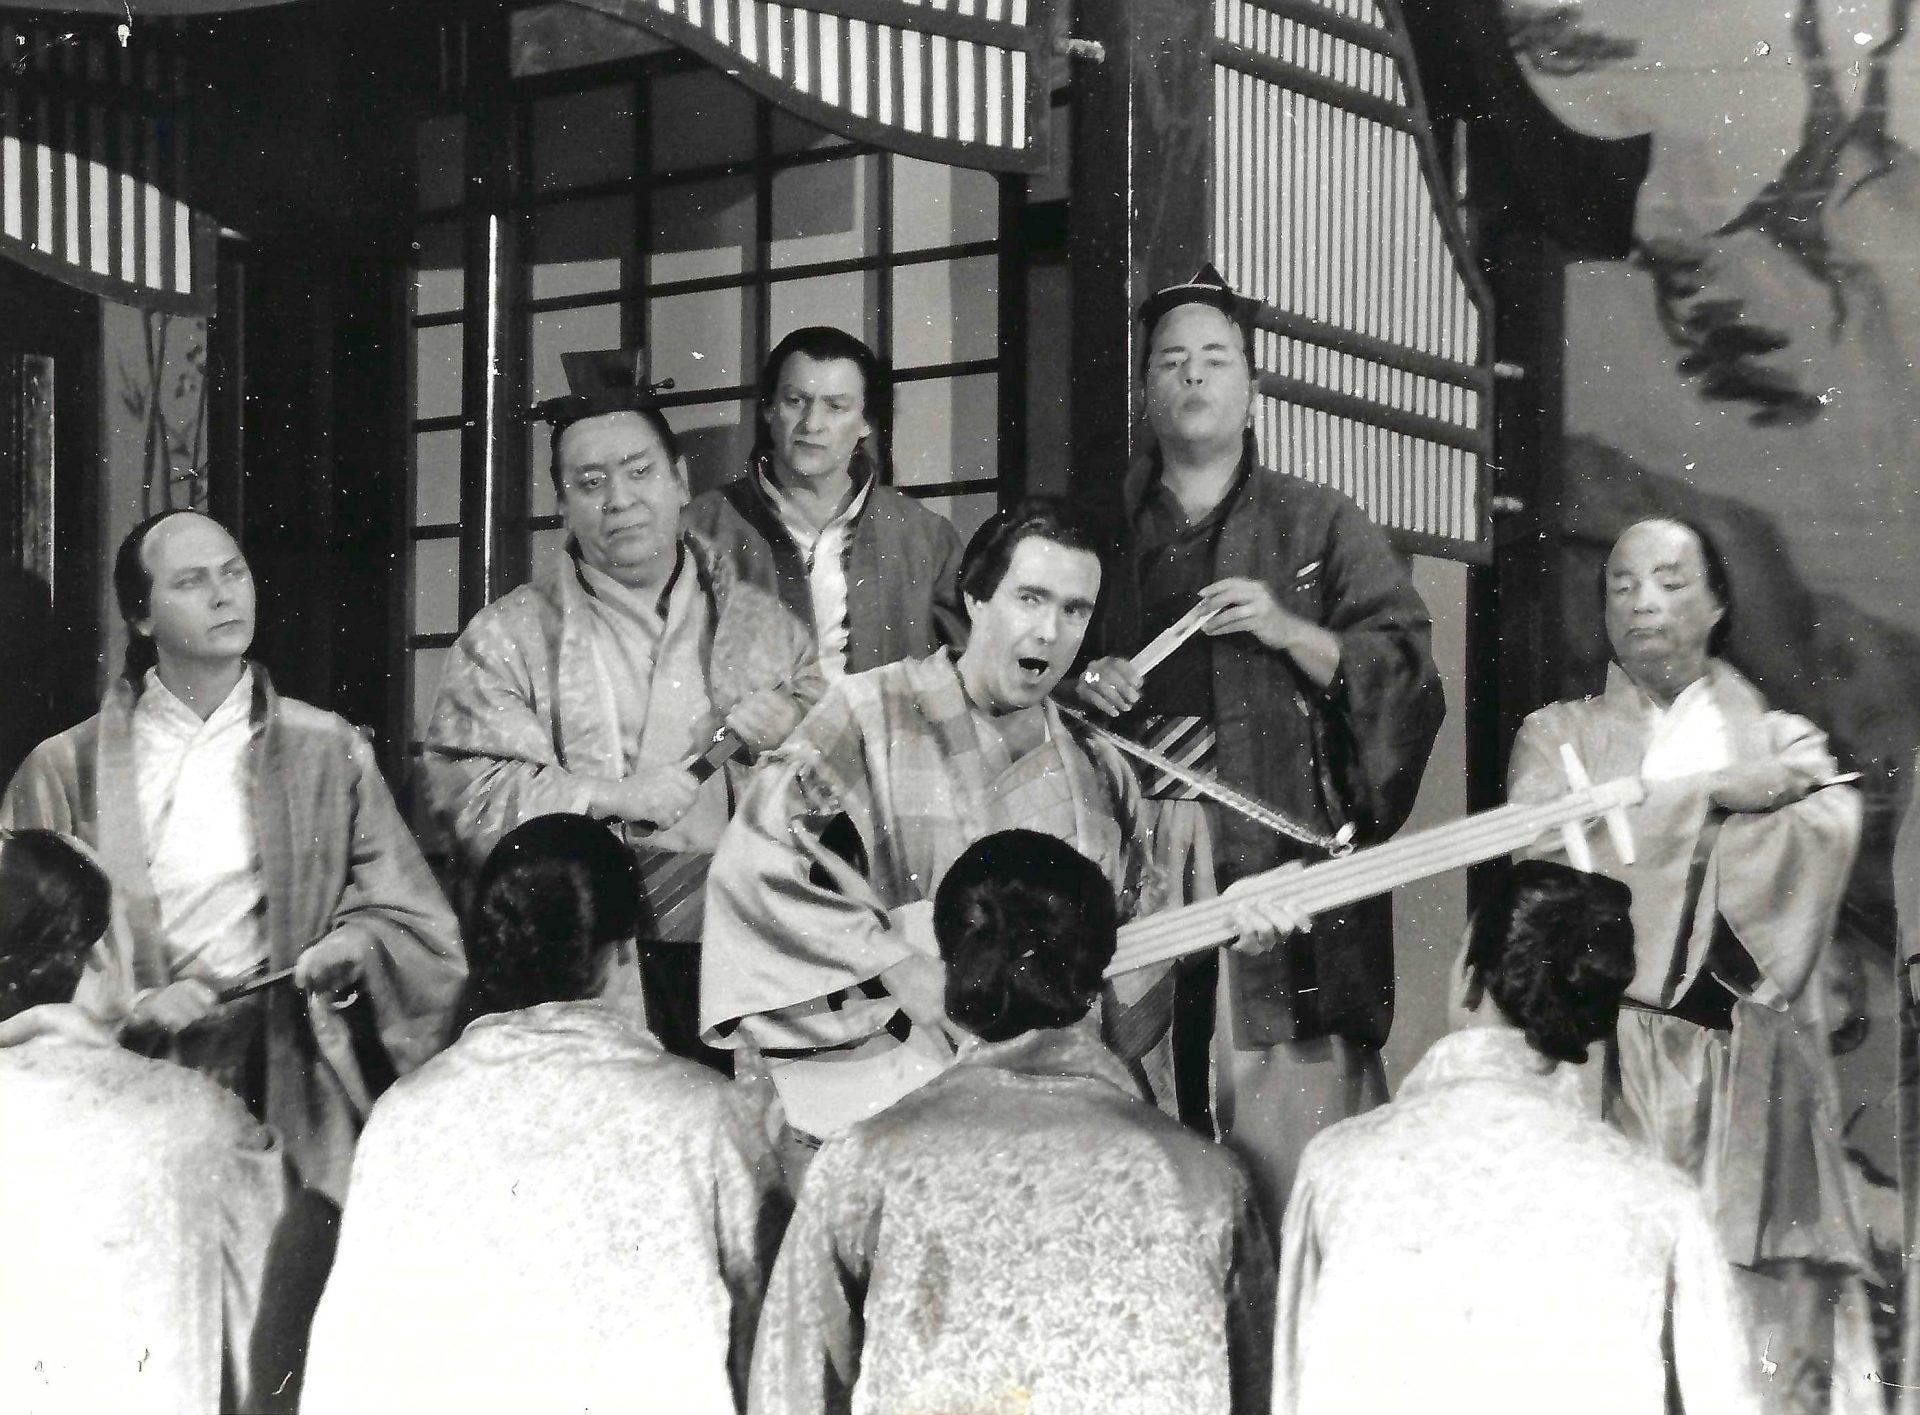 Jimmy in Mikado with in the Opéra de Toulon France.